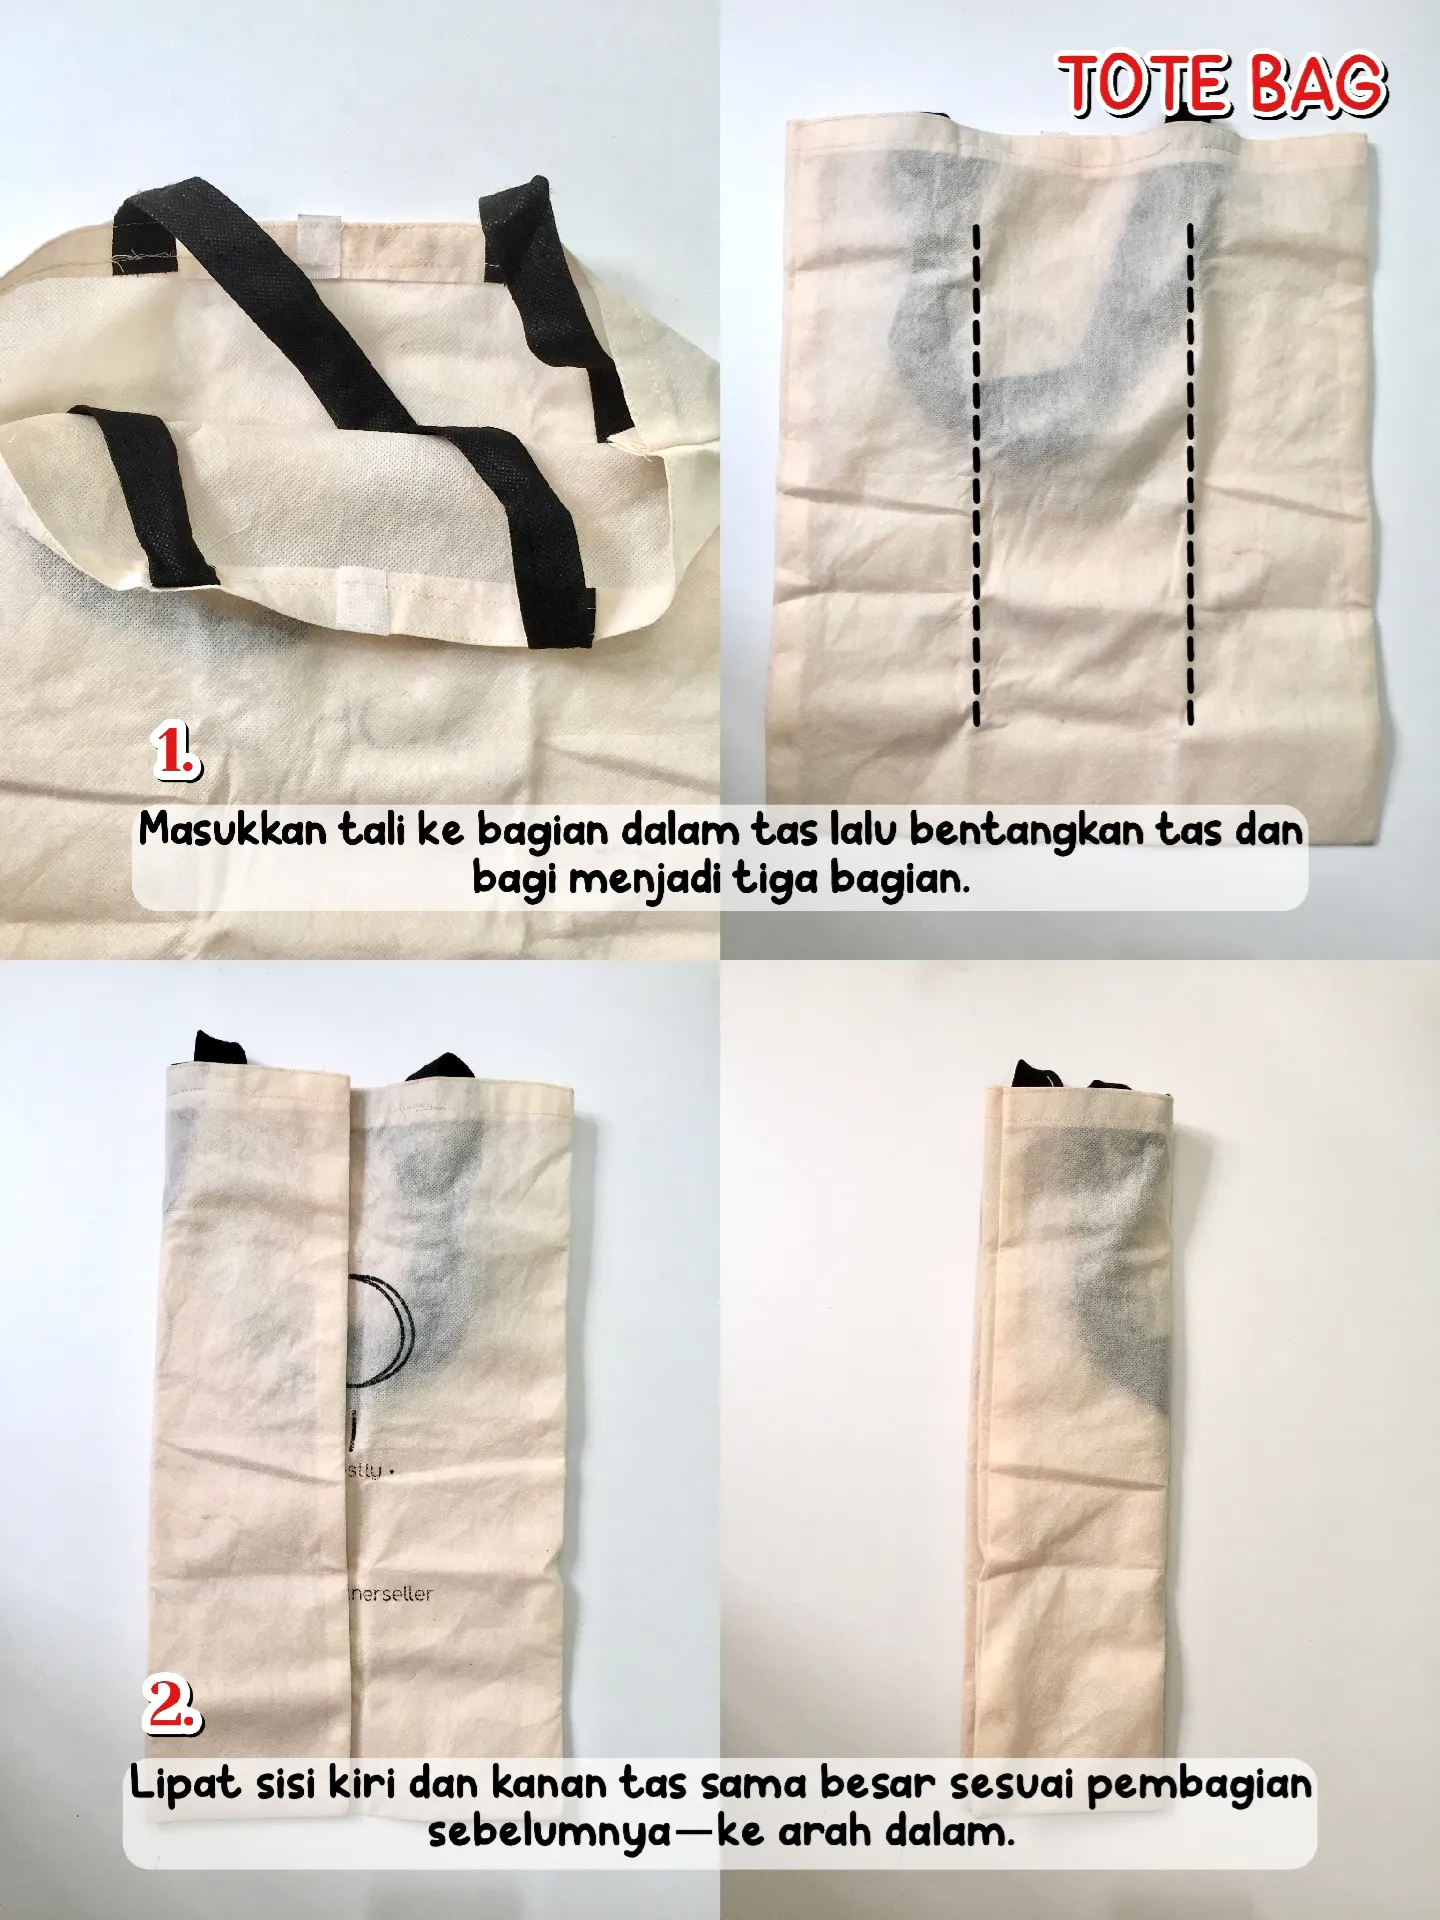 How to Store Reusable Bags: 4 Clever Tips